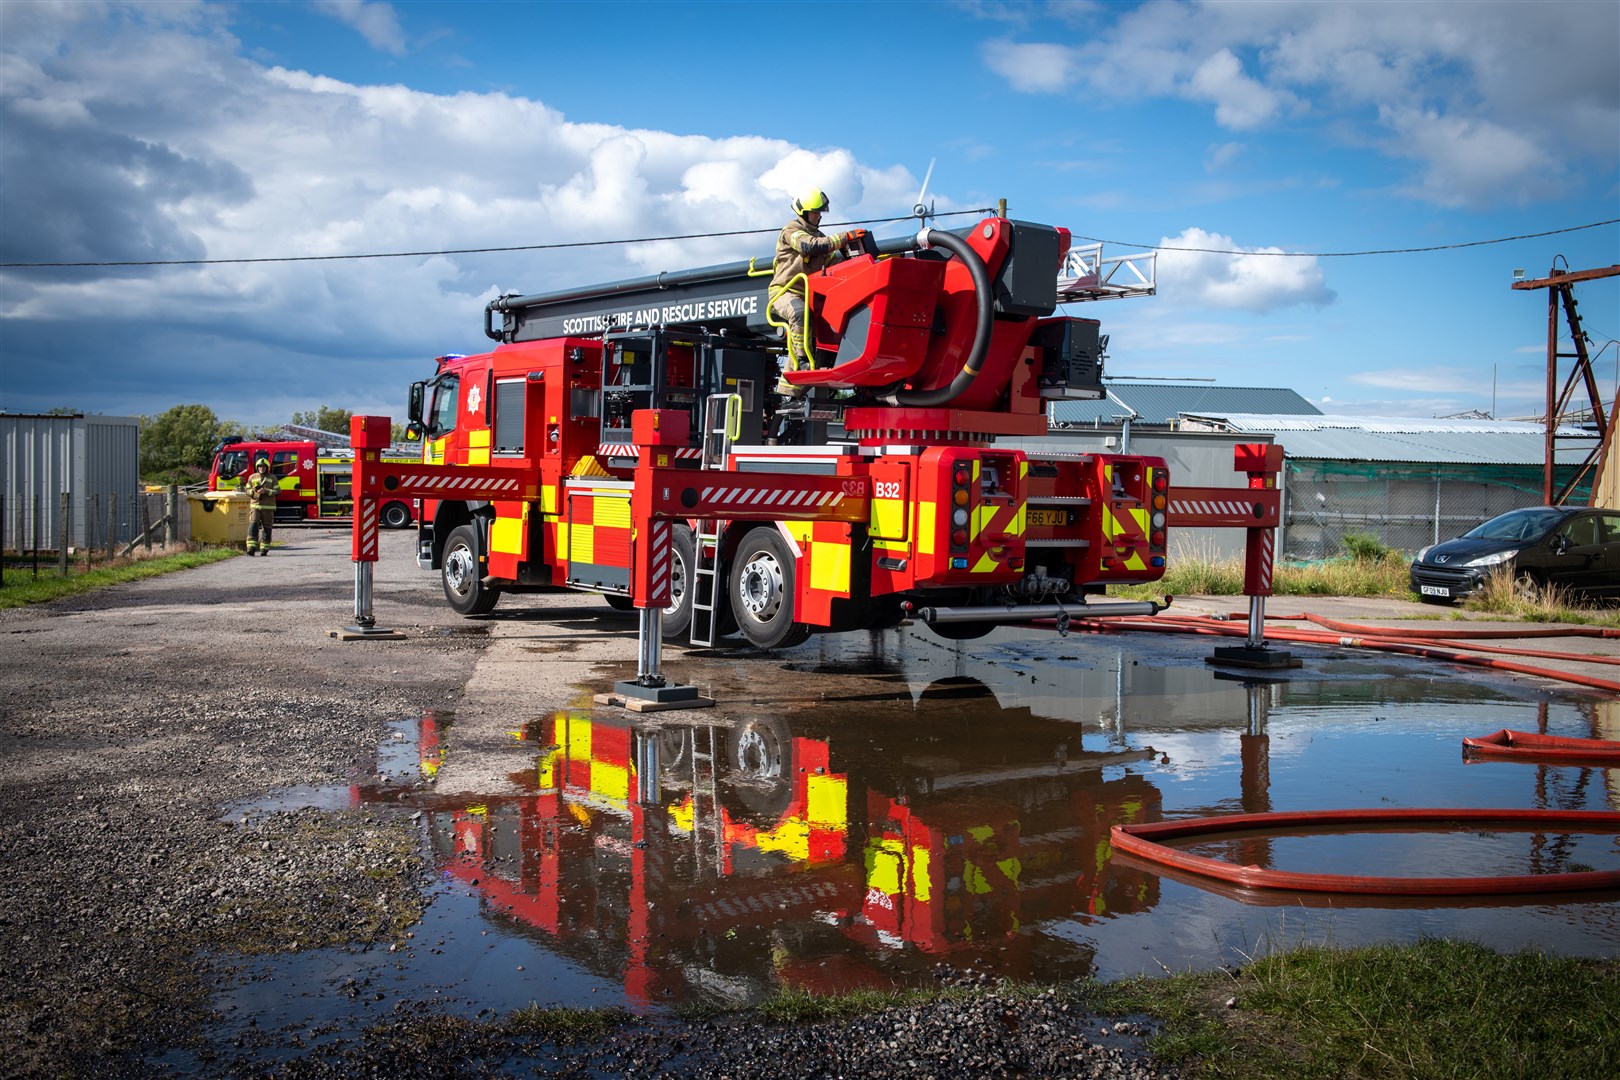 Fire engines tackling blaze at Ross-shire industrial estate.